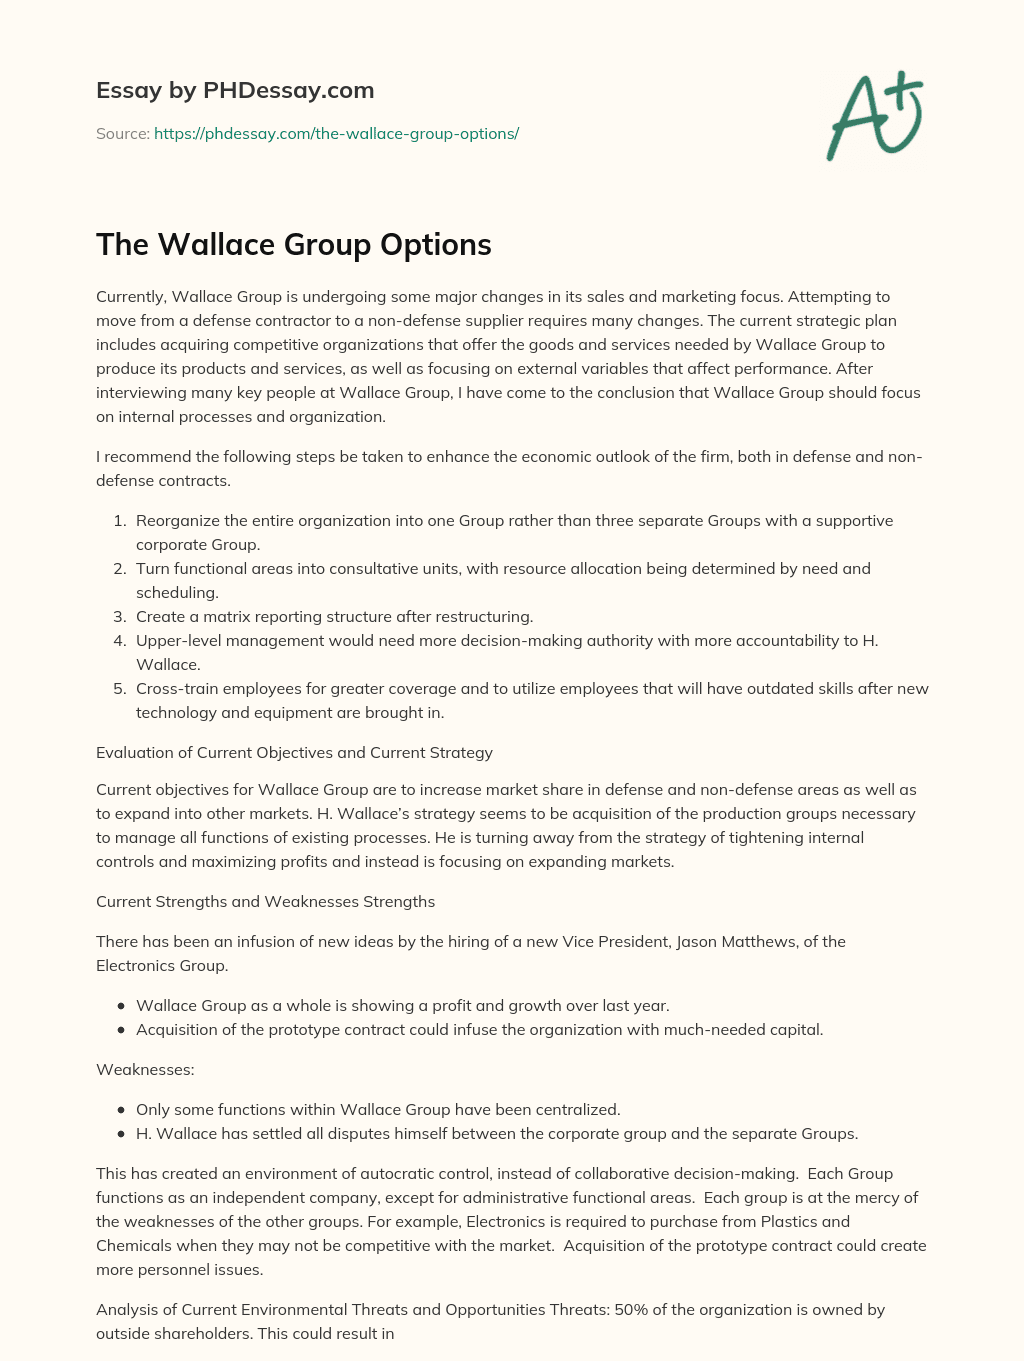 The Wallace Group Options essay